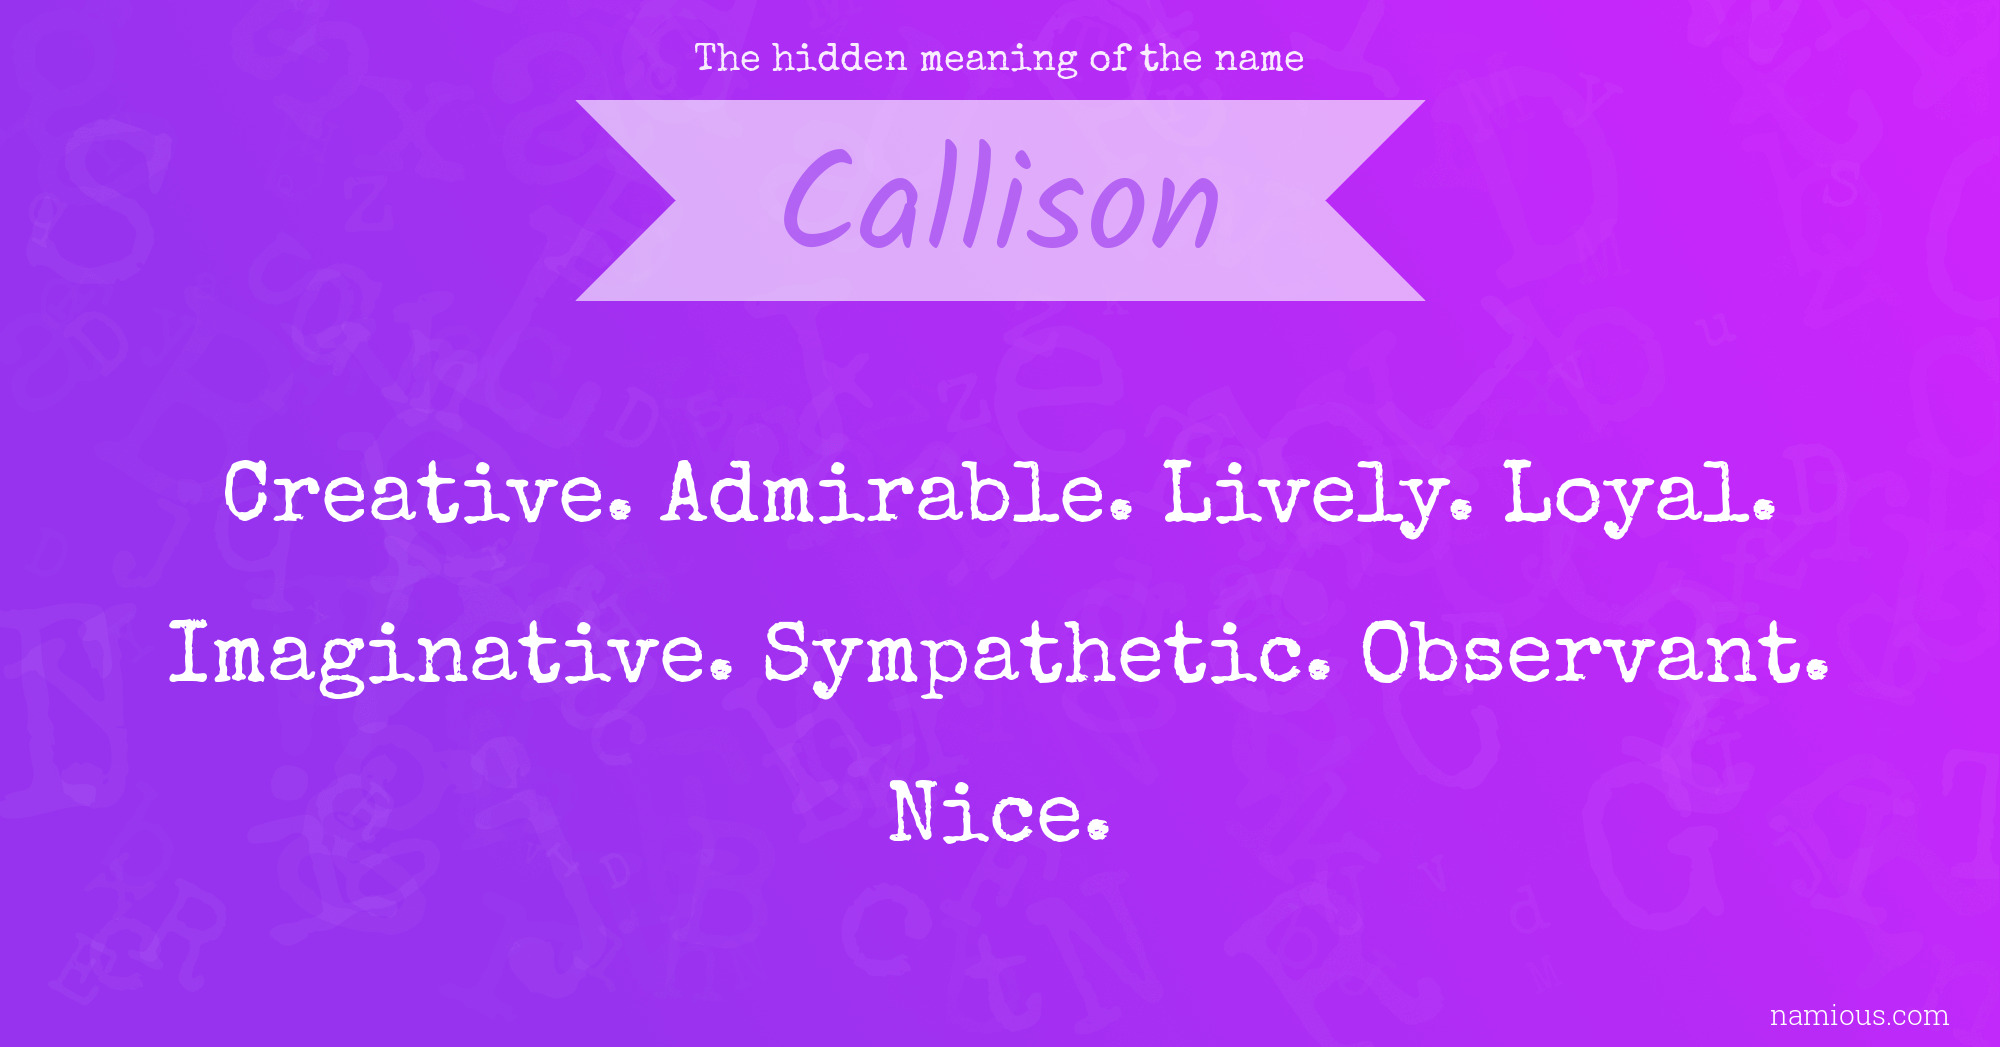 The hidden meaning of the name Callison